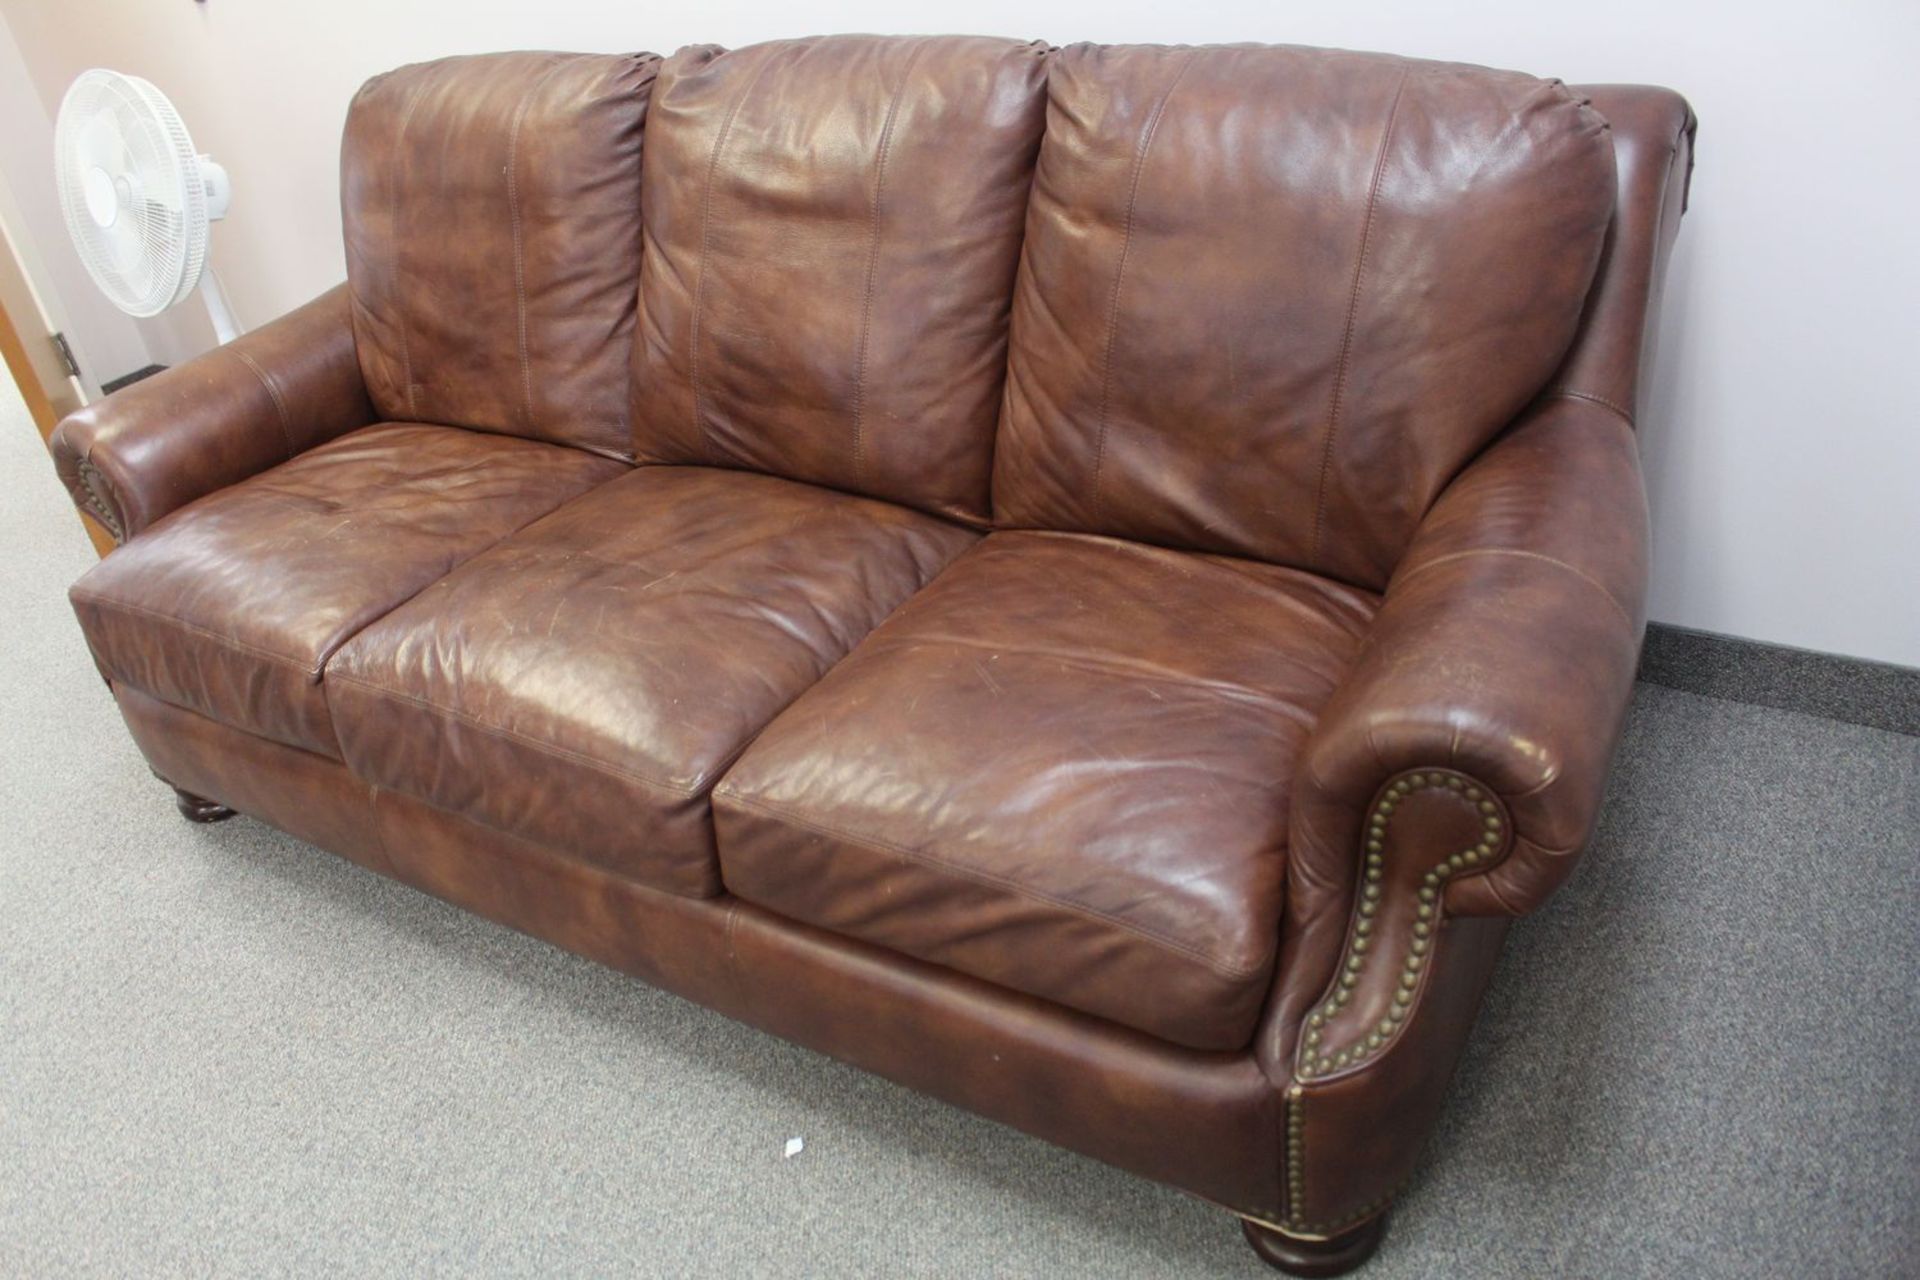 BROWN LEATHER 3-SEAT SOFA W/ STUDS - 88"L X 45"D X 36"H (LOCATED AT: NIAGARA ON-THE-LAKE, ONTARIO - Image 2 of 3